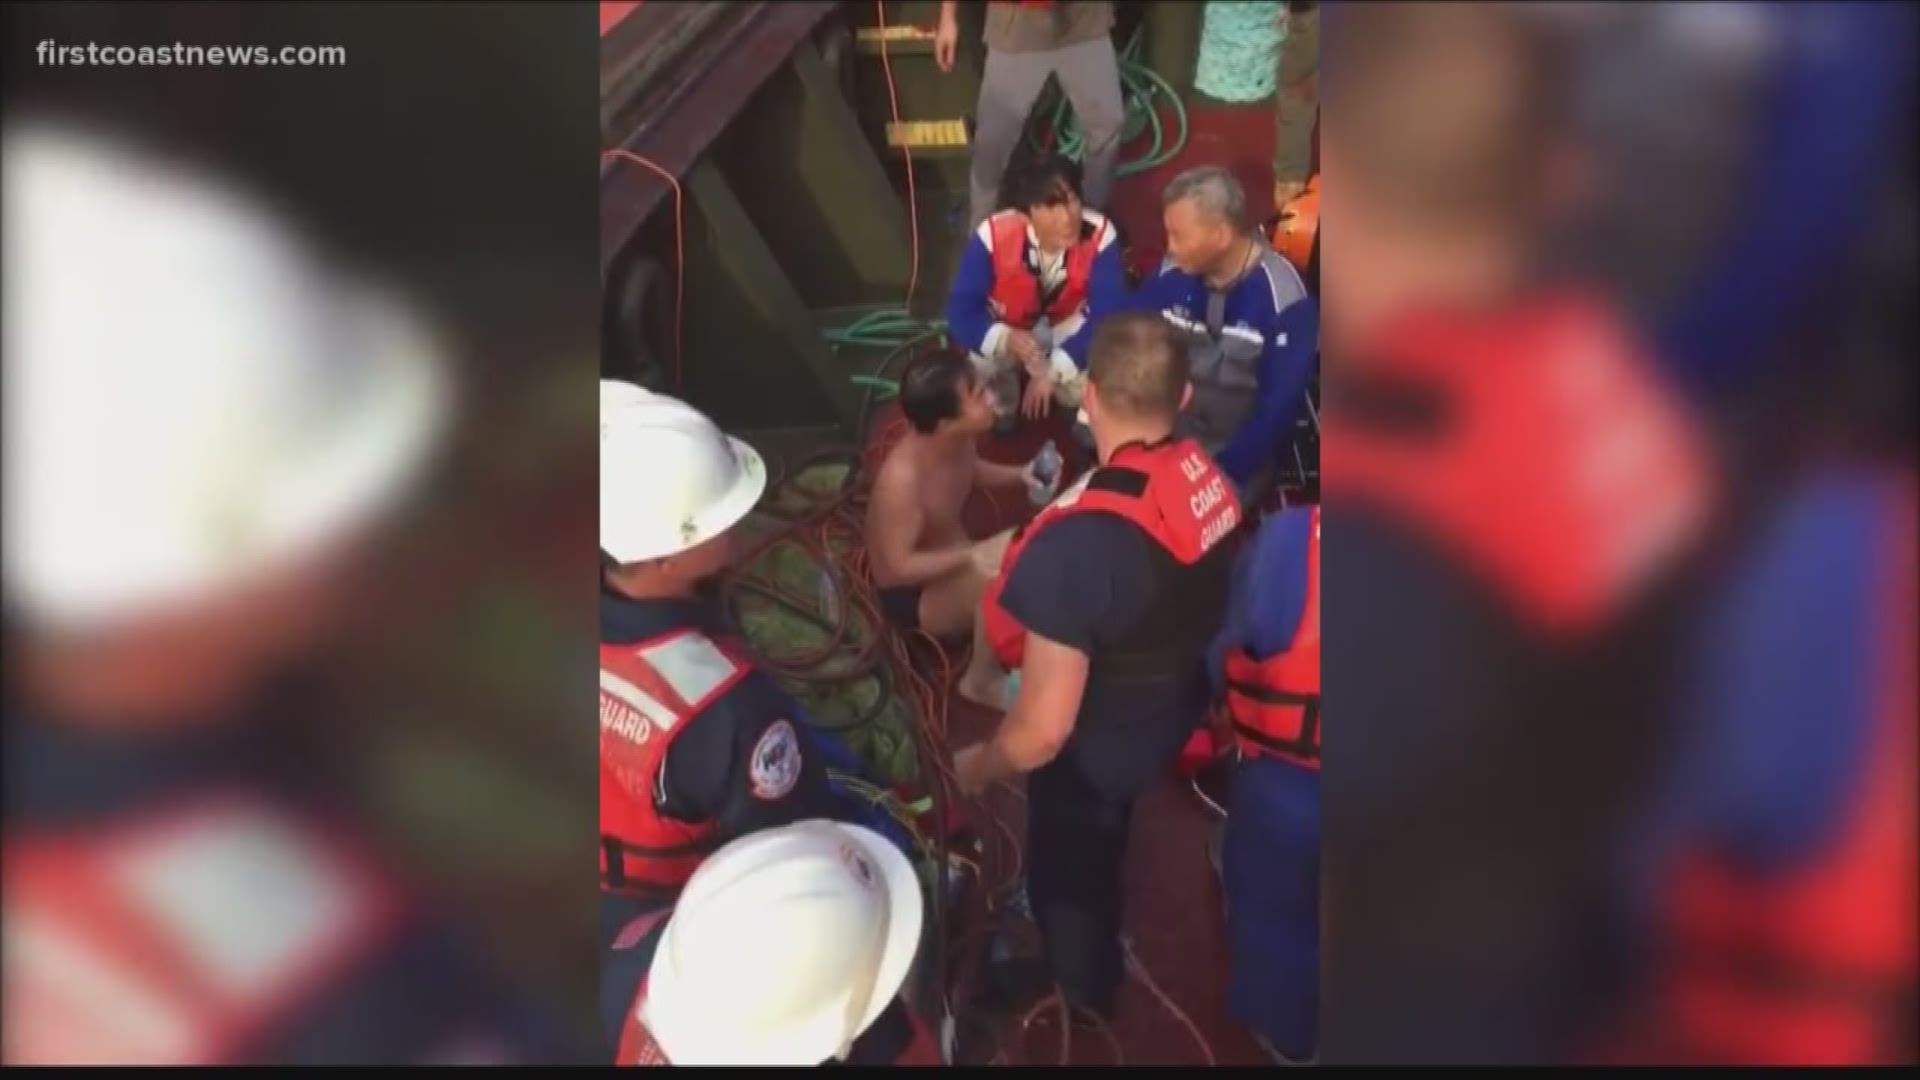 The final crew member from an overturned cargo ship in St. Simons Sound has been rescued after spending over 30 hours trapped inside the ship's control room, according to the U.S. Coast Gaurd.